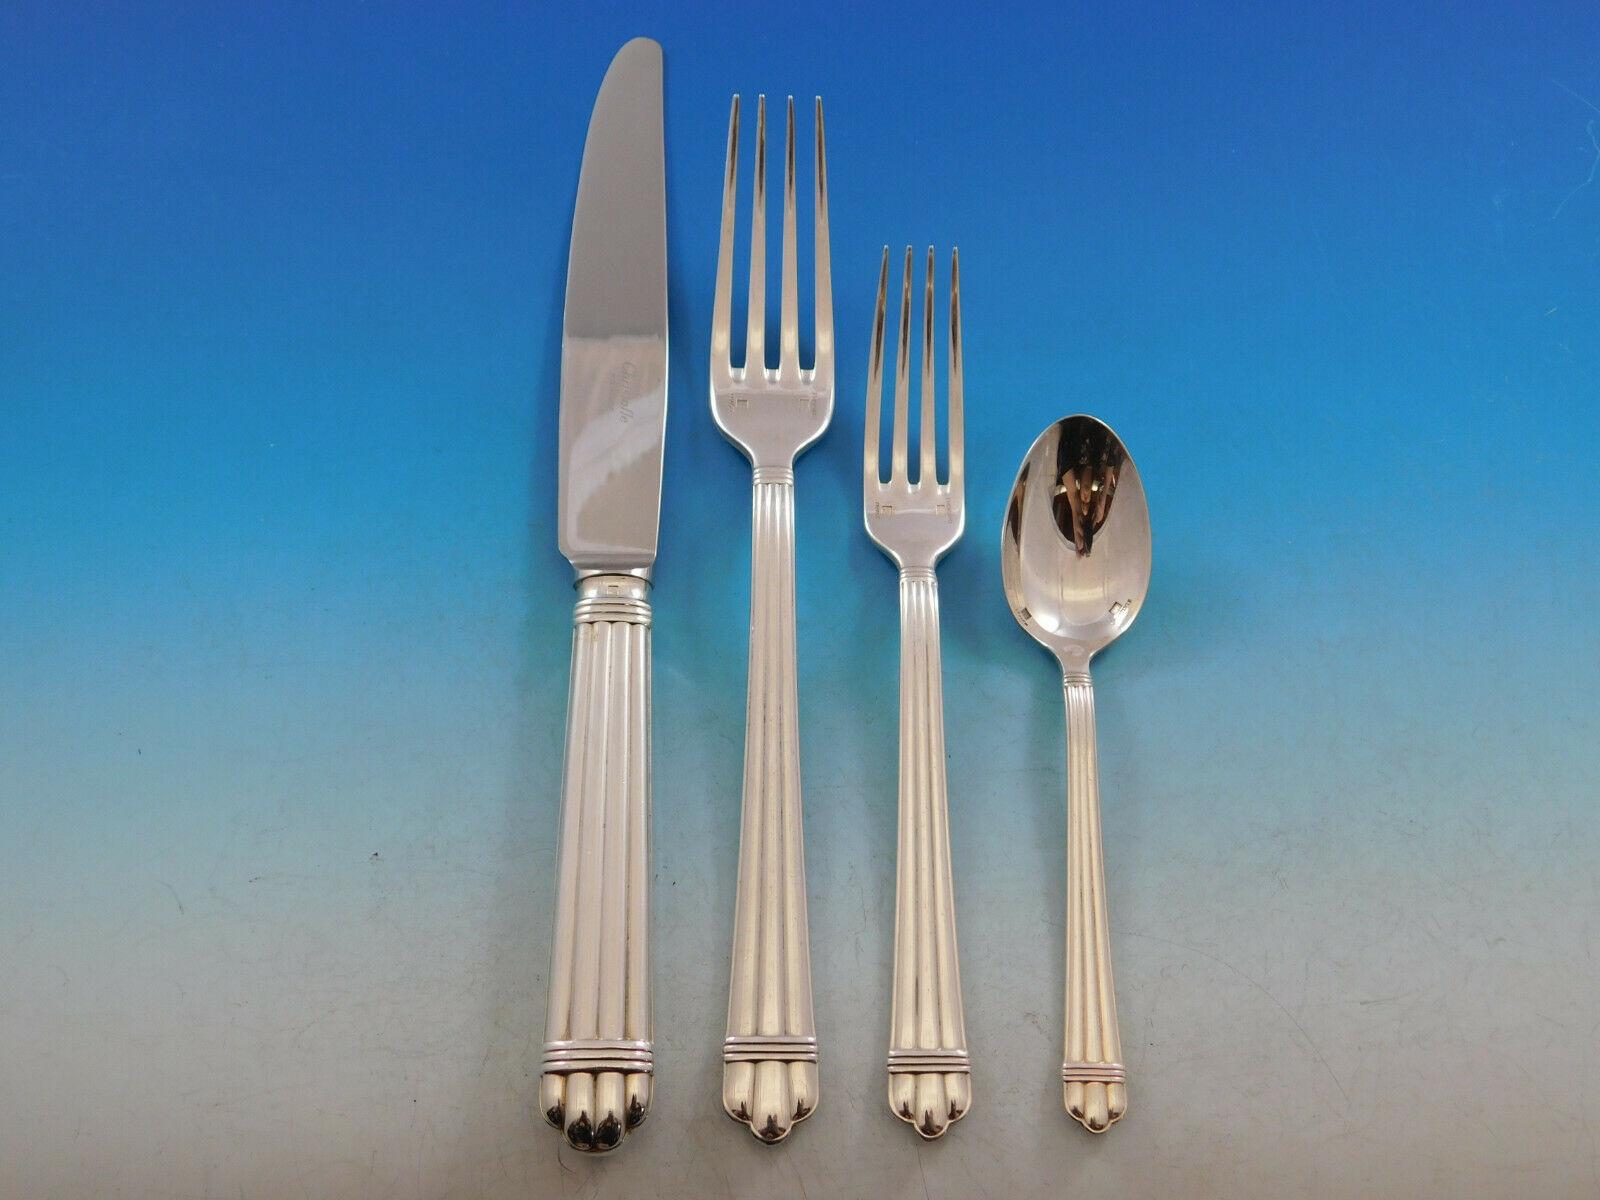 French Aria by Christofle France Silver Plate Flatware Service for 8 Set 76 Pcs Dinner